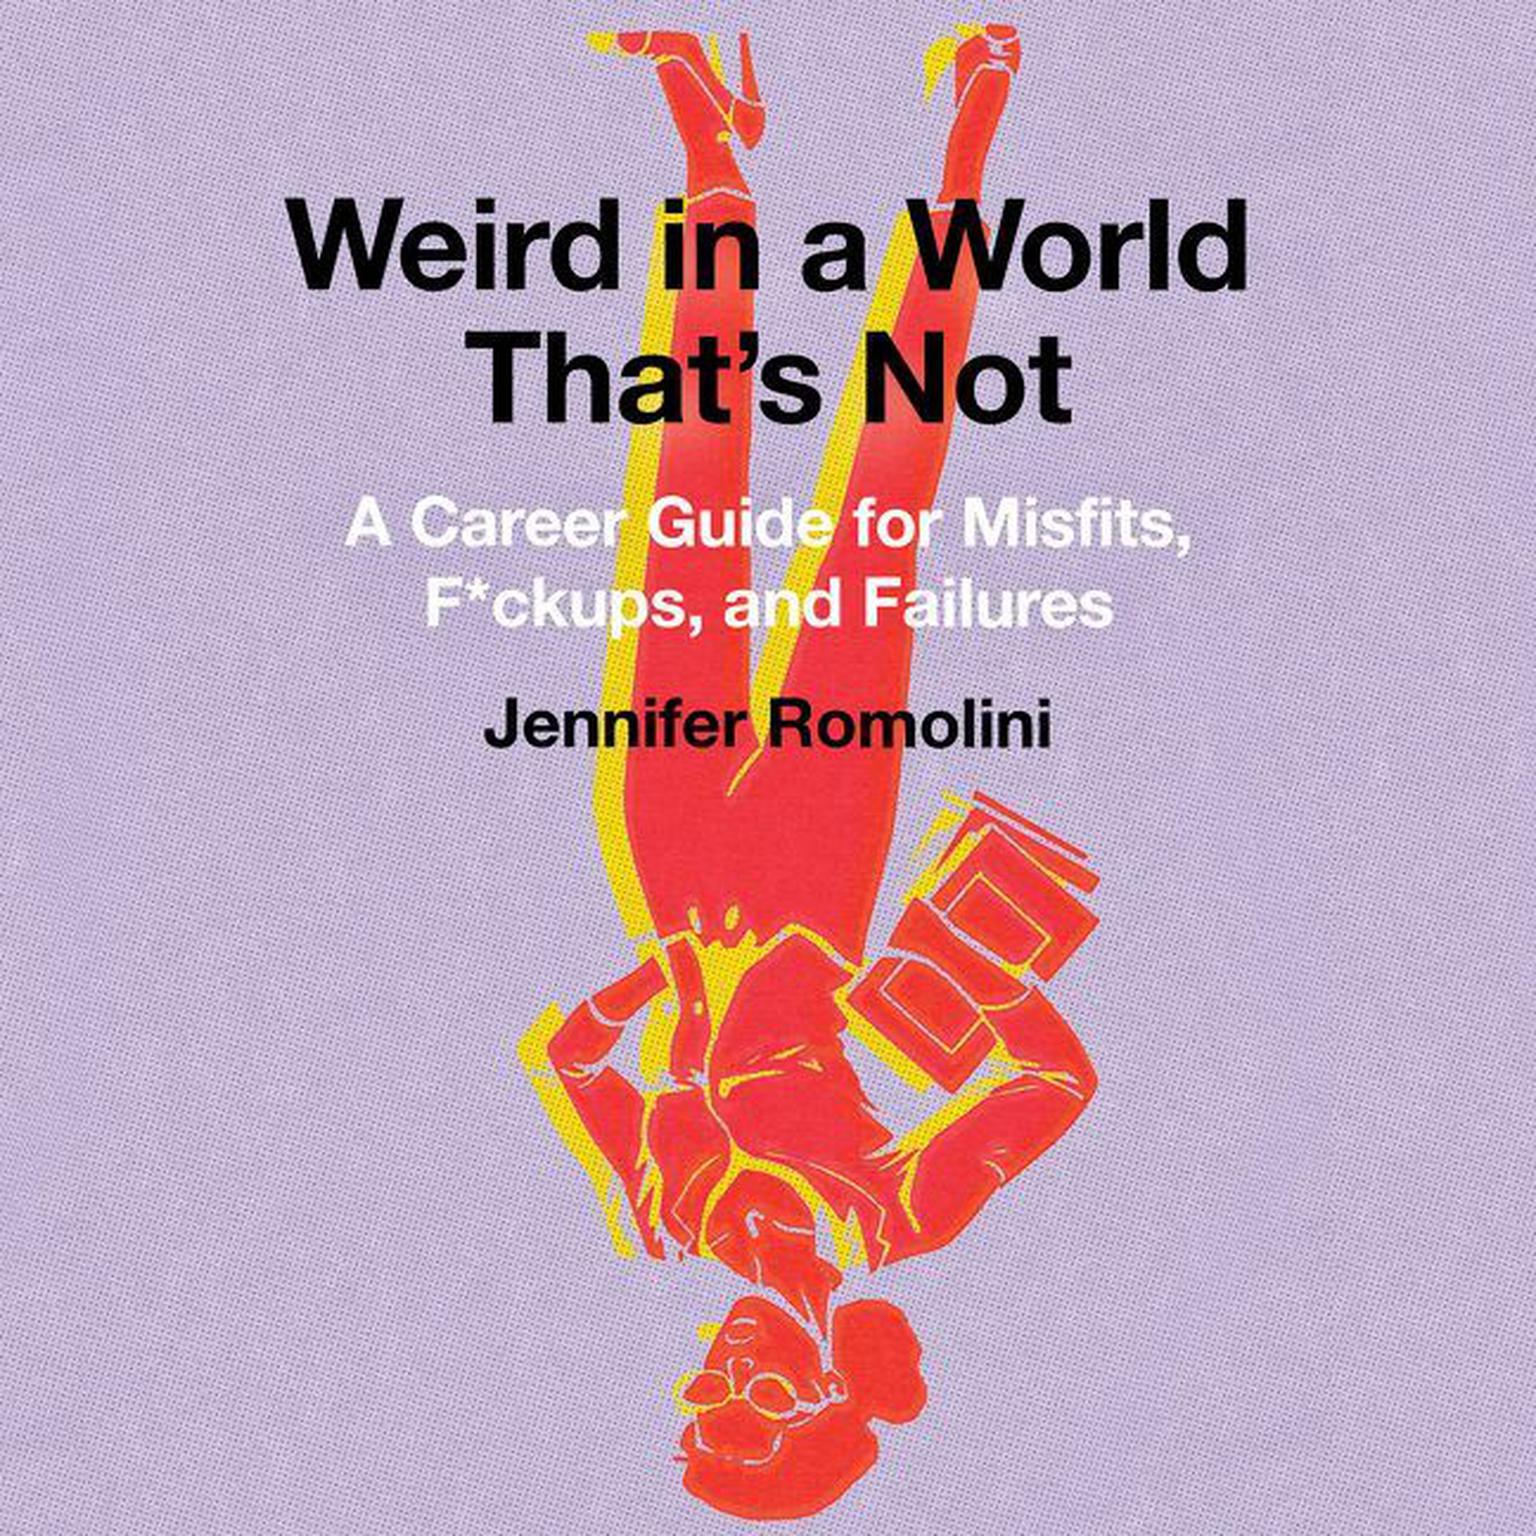 Weird in a World Thats Not: A Career Guide for Misfits, F*ckups, and Failures Audiobook, by Jennifer Romolini